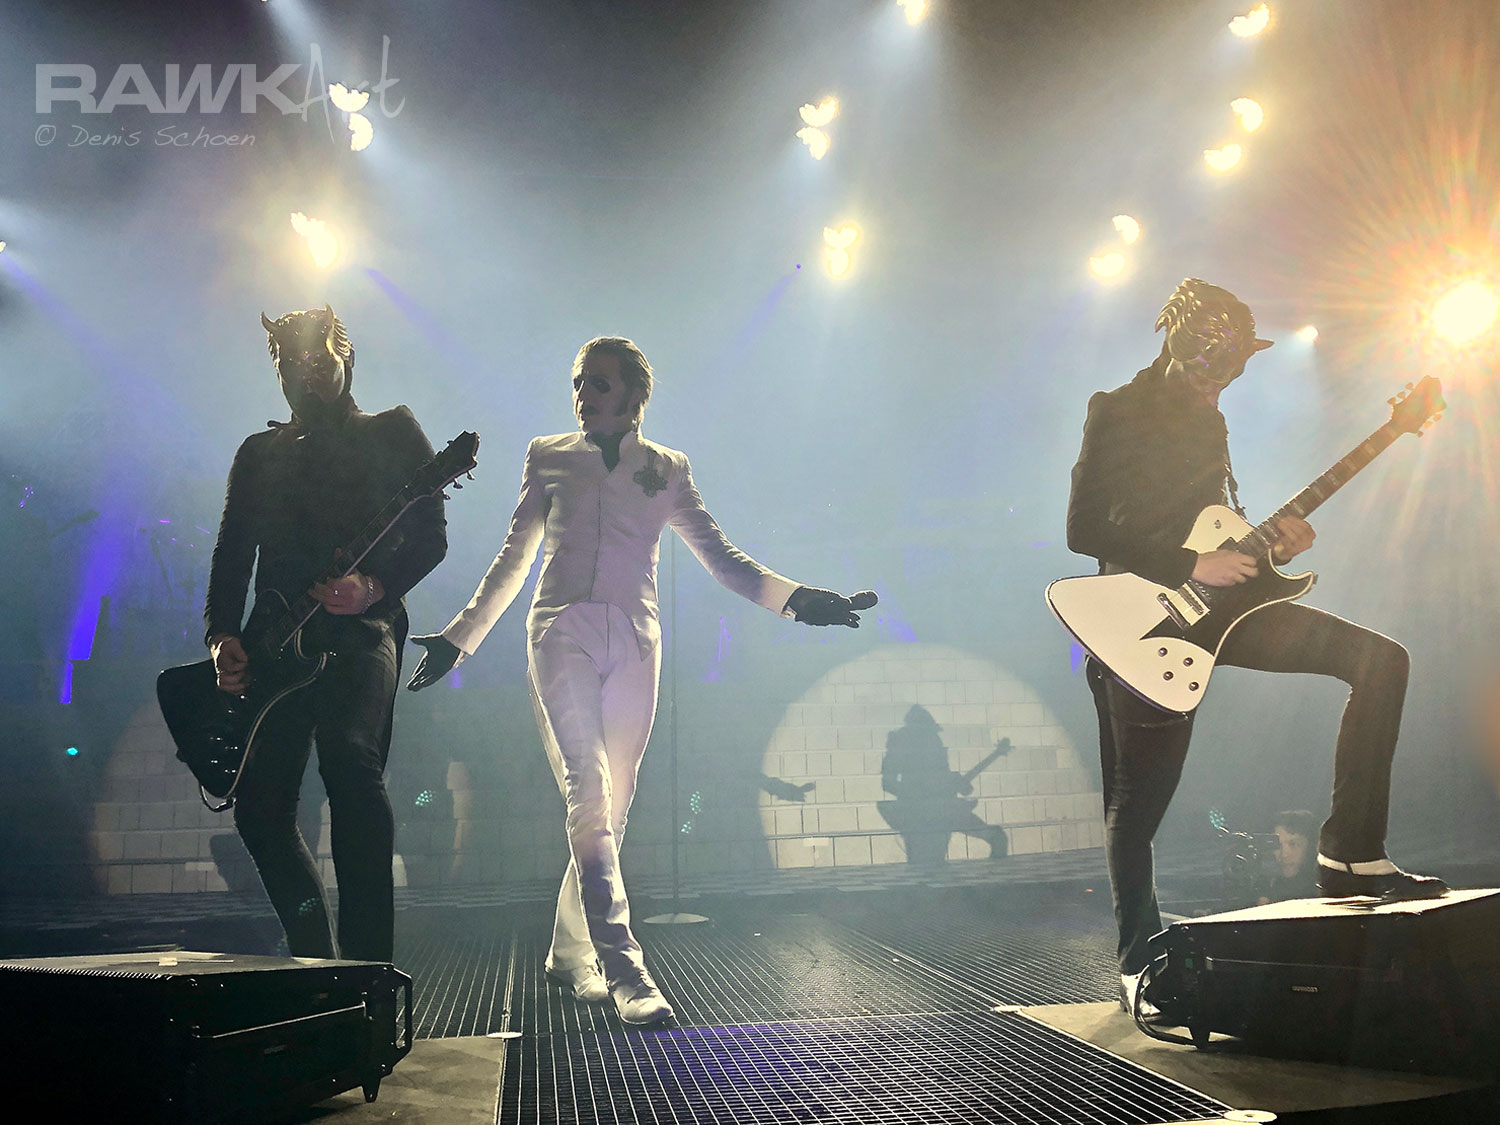 Ghost at RuhrCongress, Bochum, Germany 2019, A Pale Tour Named Death